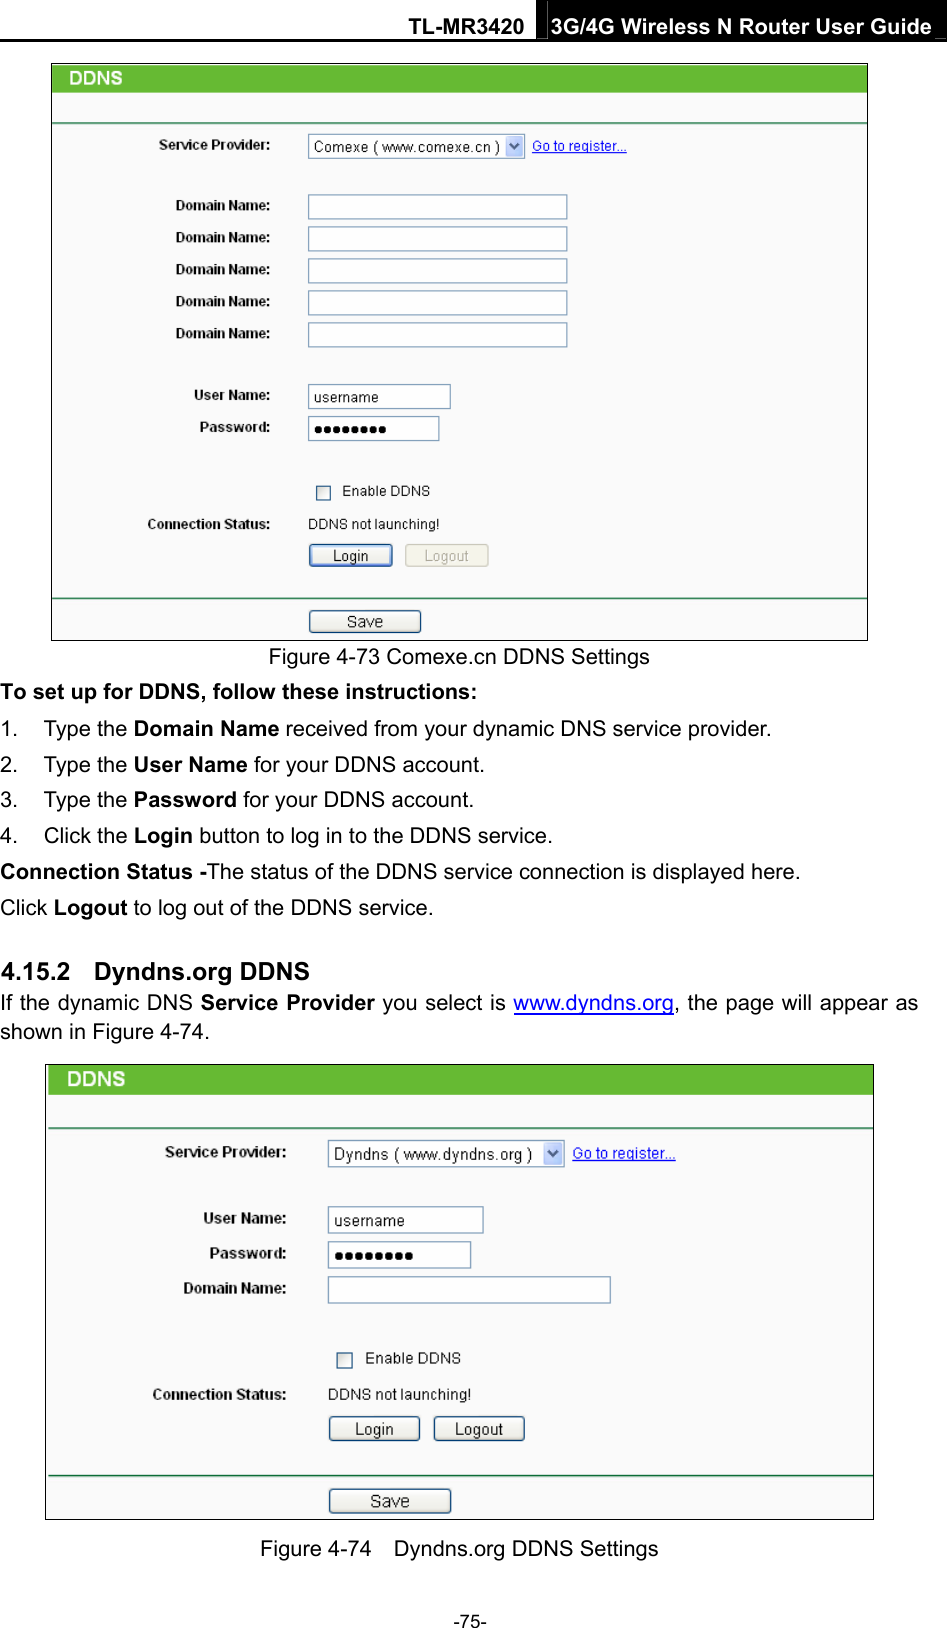 TL-MR3420 3G/4G Wireless N Router User Guide  Figure 4-73 Comexe.cn DDNS Settings To set up for DDNS, follow these instructions: 1. Type the Domain Name received from your dynamic DNS service provider.     2. Type the User Name for your DDNS account.   3. Type the Password for your DDNS account.   4. Click the Login button to log in to the DDNS service. Connection Status -The status of the DDNS service connection is displayed here. Click Logout to log out of the DDNS service.   4.15.2  Dyndns.org DDNS If the dynamic DNS Service Provider you select is www.dyndns.org, the page will appear as shown in Figure 4-74.  Figure 4-74    Dyndns.org DDNS Settings -75- 